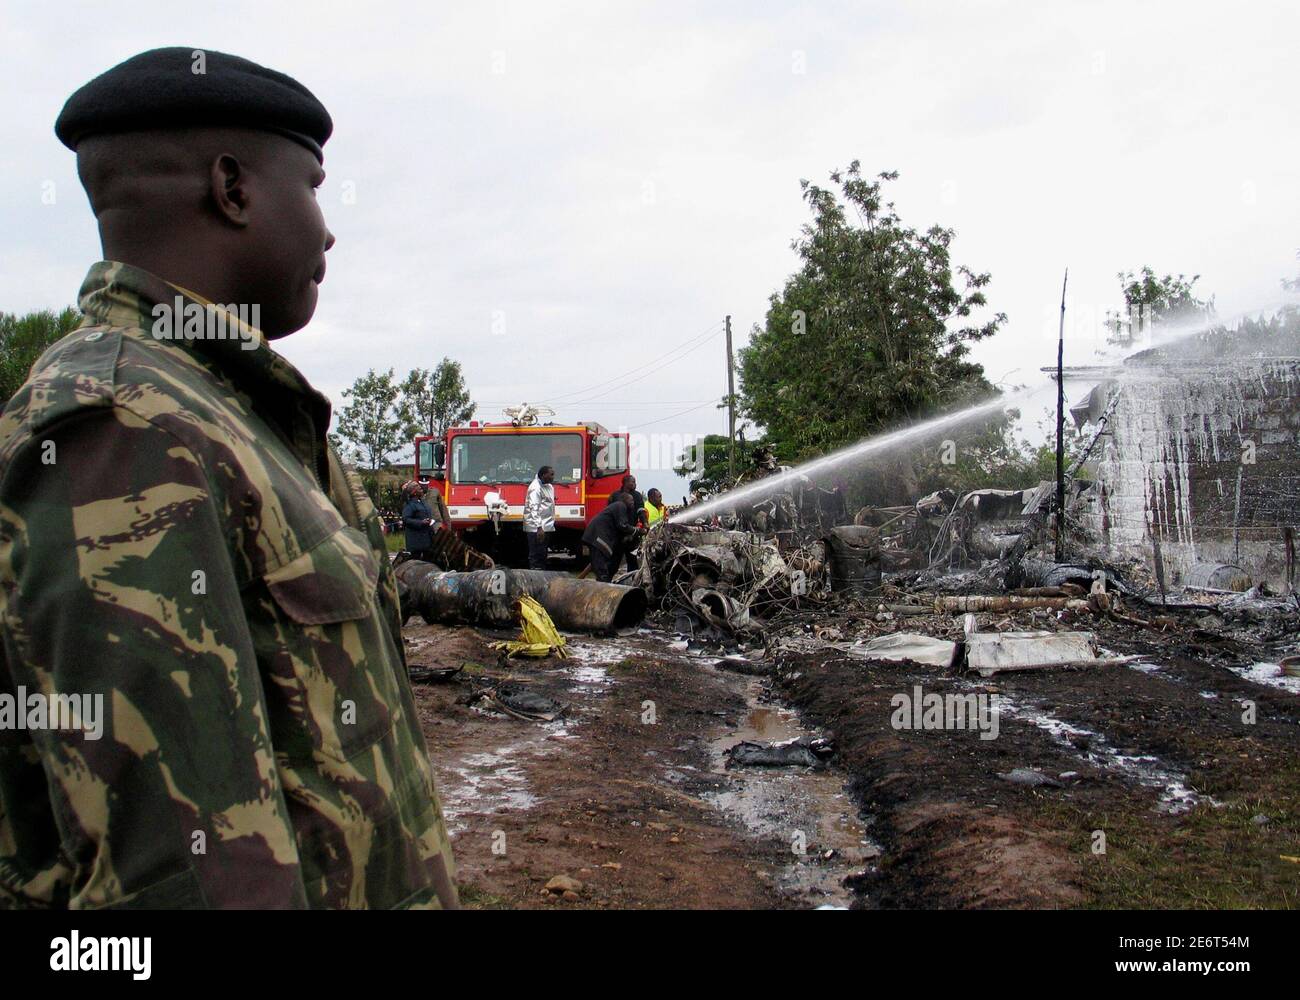 A policeman watches emergency workers put out a fire from the wreckage of a twin-engine Buffalo plane that crashed in Ruai, the outskirts of Kenya's capital Nairobi, December 30, 2006. A Kenyan plane carrying relief supplies and fuel to neighbouring war-torn Somalia crashed and burst into flames on Saturday, but officials said there were no fatalities. REUTERS/Thomas Mukoya (KENYA) Stock Photo